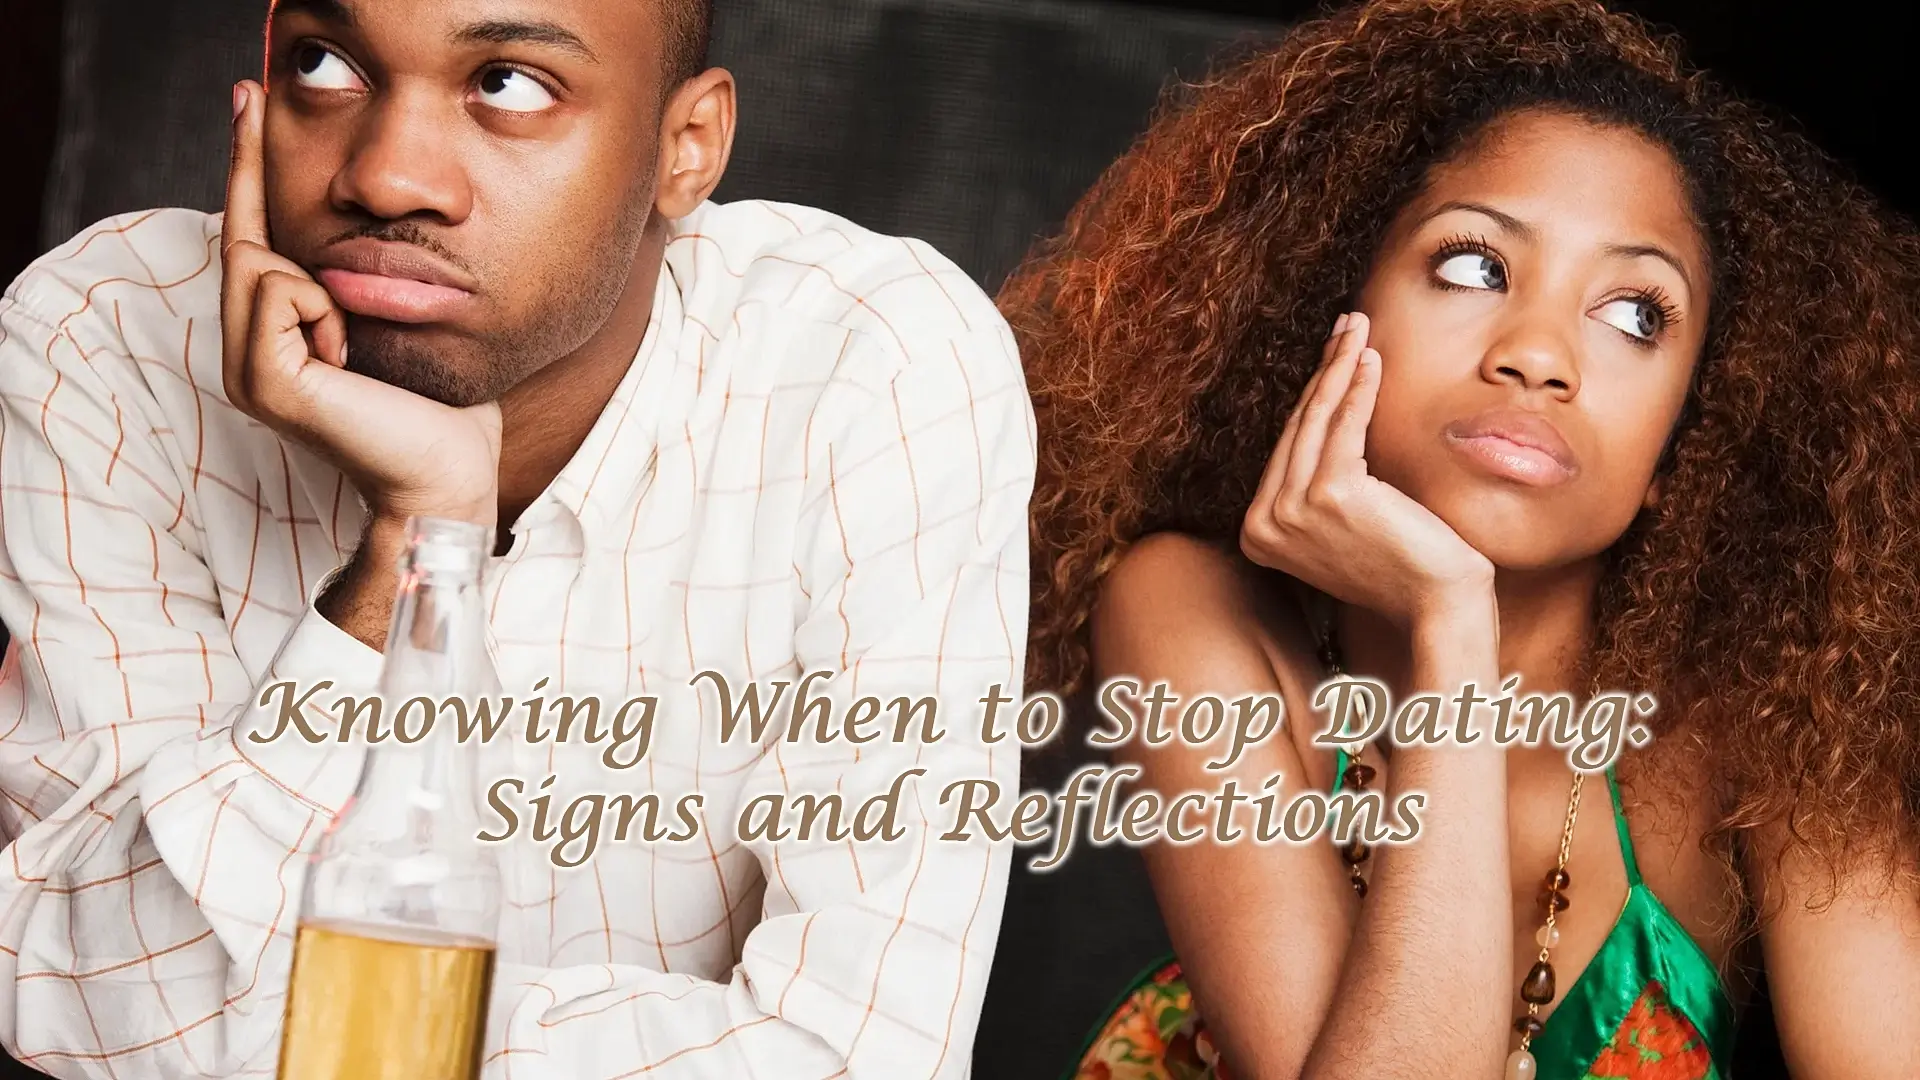 Knowing When to Stop Dating: Signs and Reflections